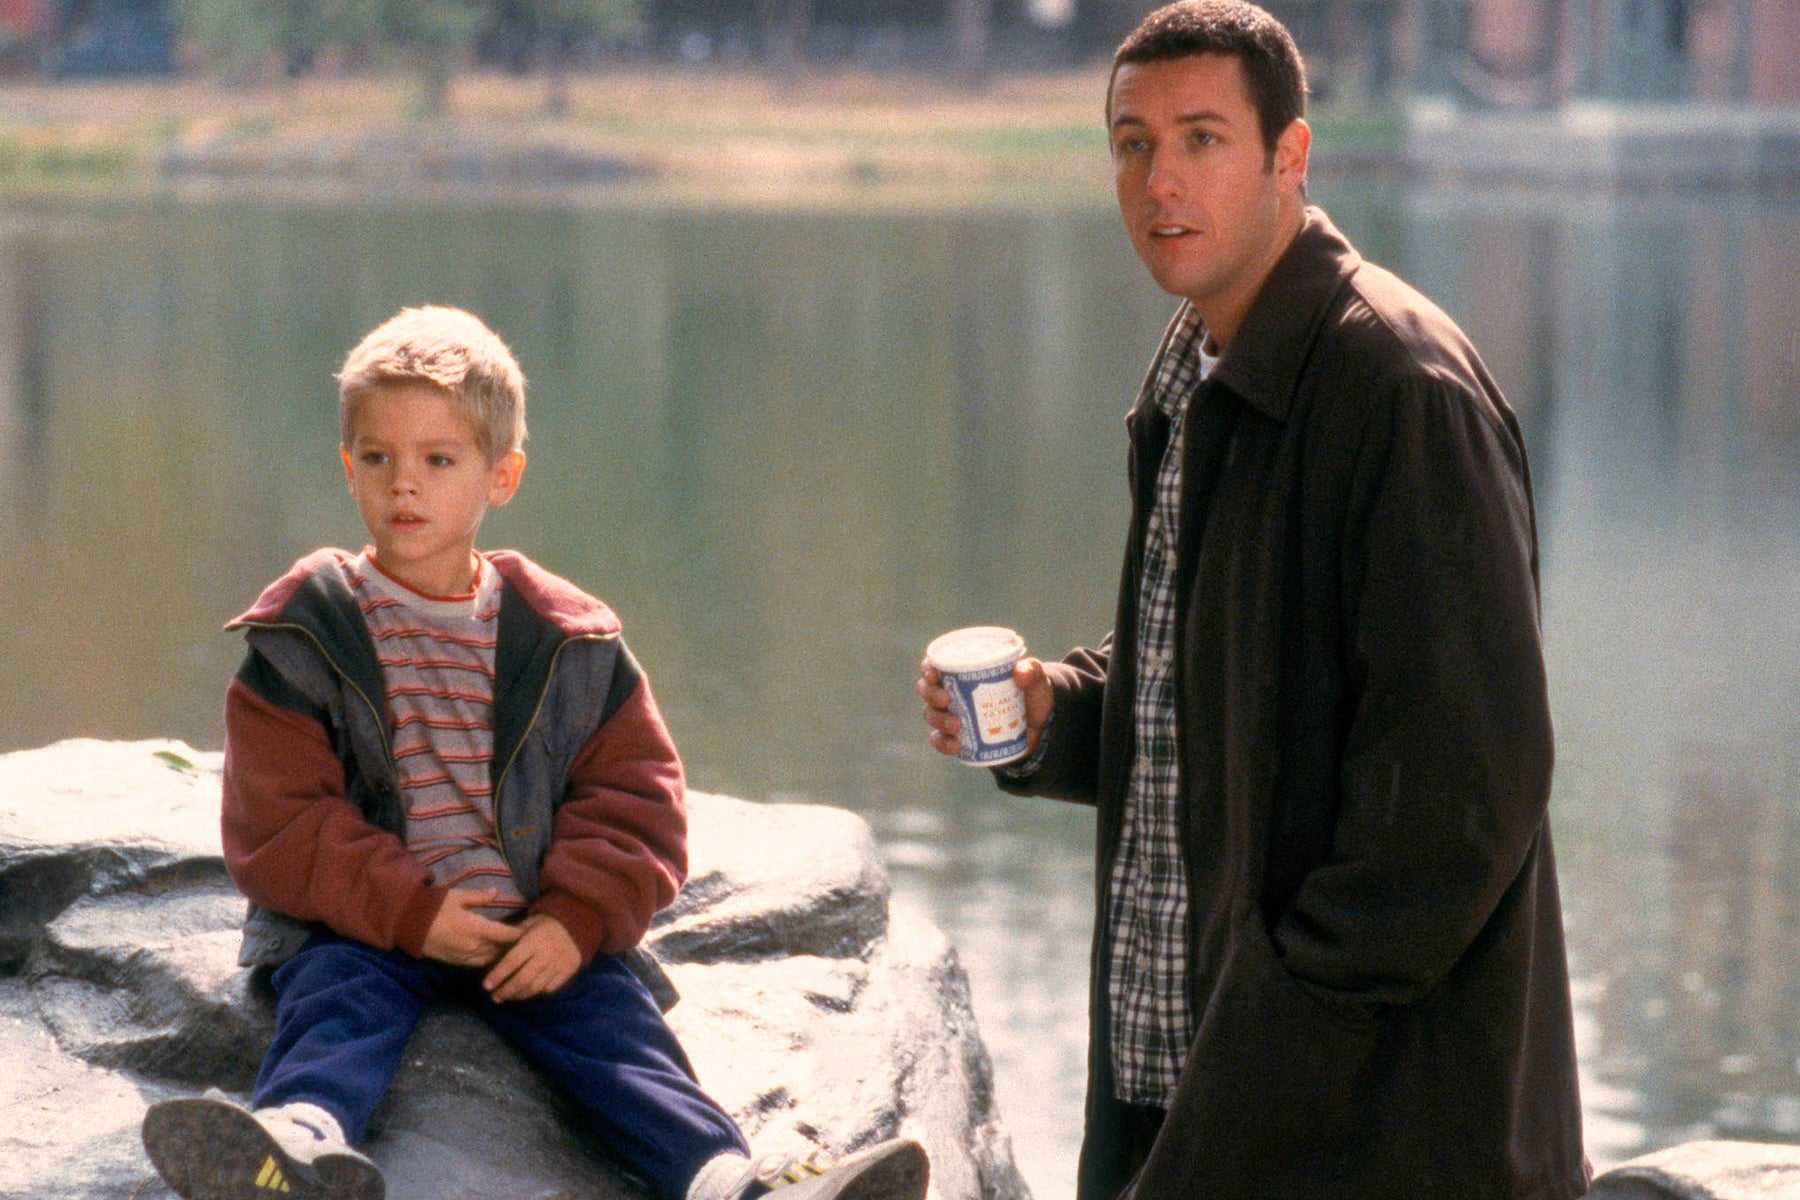 A young Cole Sprouse sits on a boulder looking off camera. Adam Sandler stands beside him, holding a coffee cup, and looking in the same direction. 